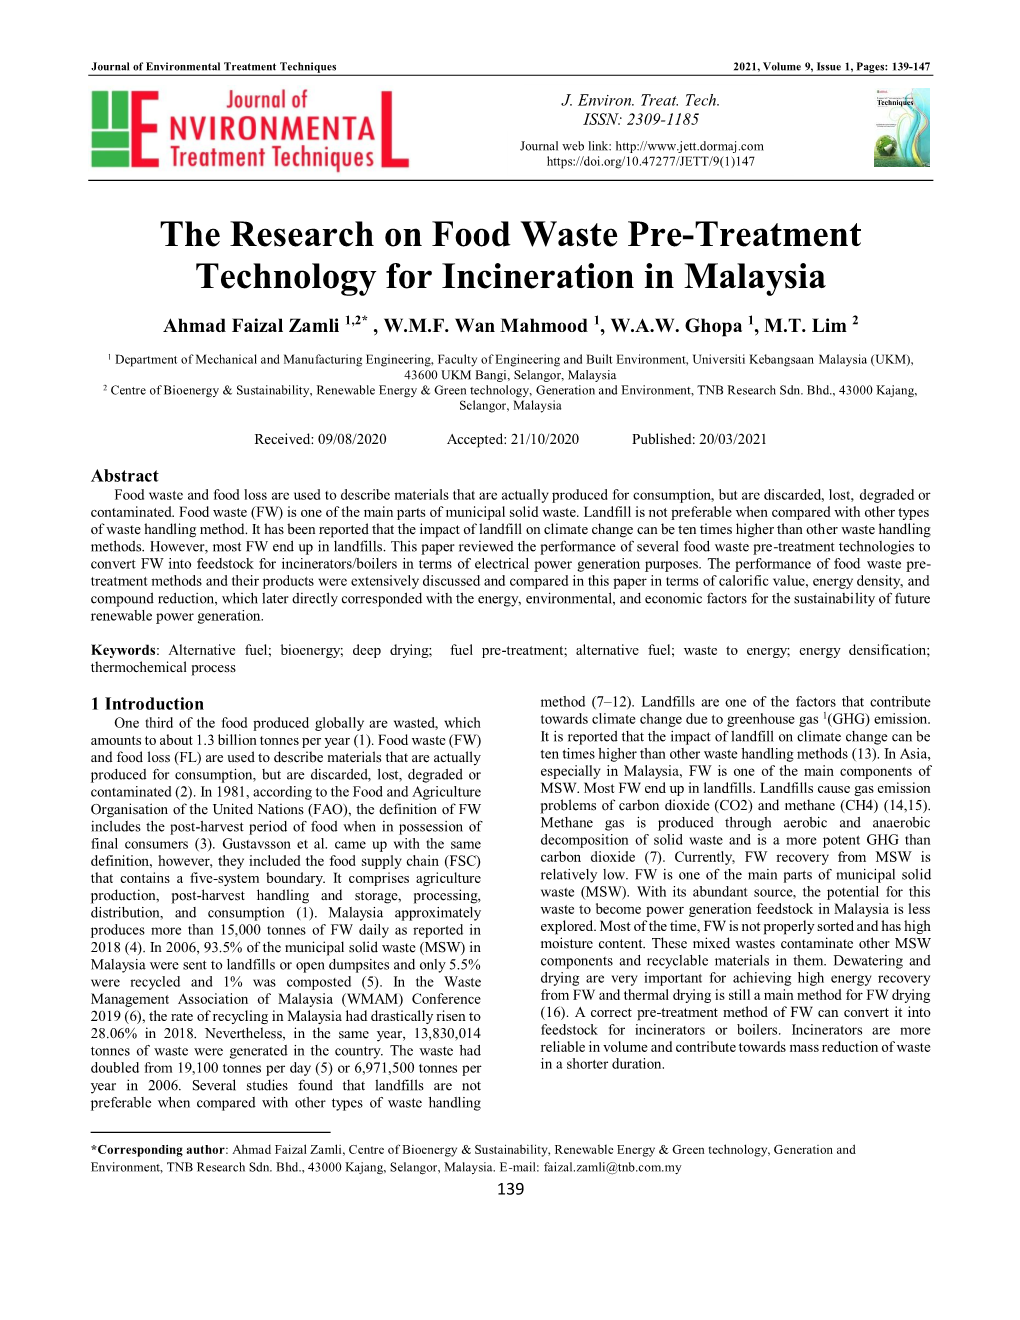 The Research on Food Waste Pre-Treatment Technology for Incineration in Malaysia